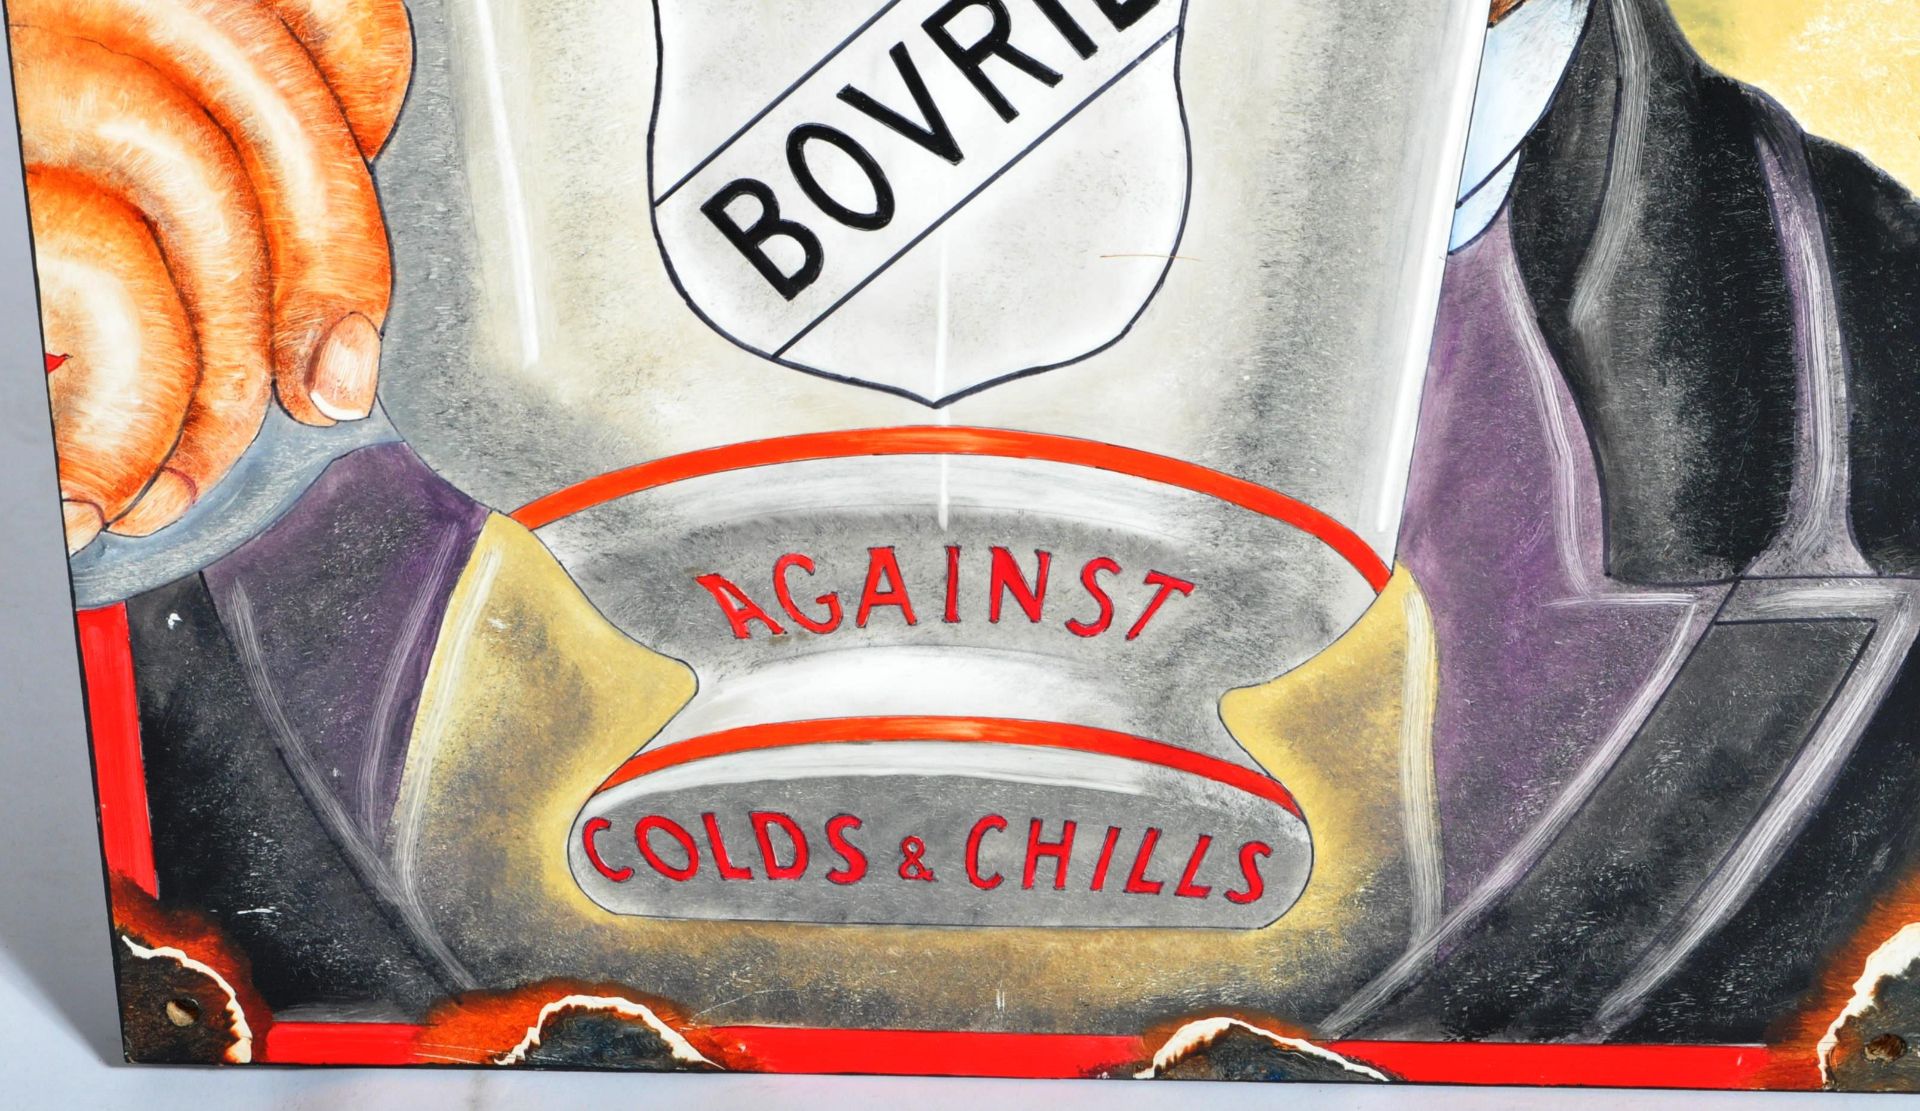 BOVRIL - CONTEMPORARY OIL ON BOARD ARTIST'S IMPRESSION SIGN - Image 4 of 4